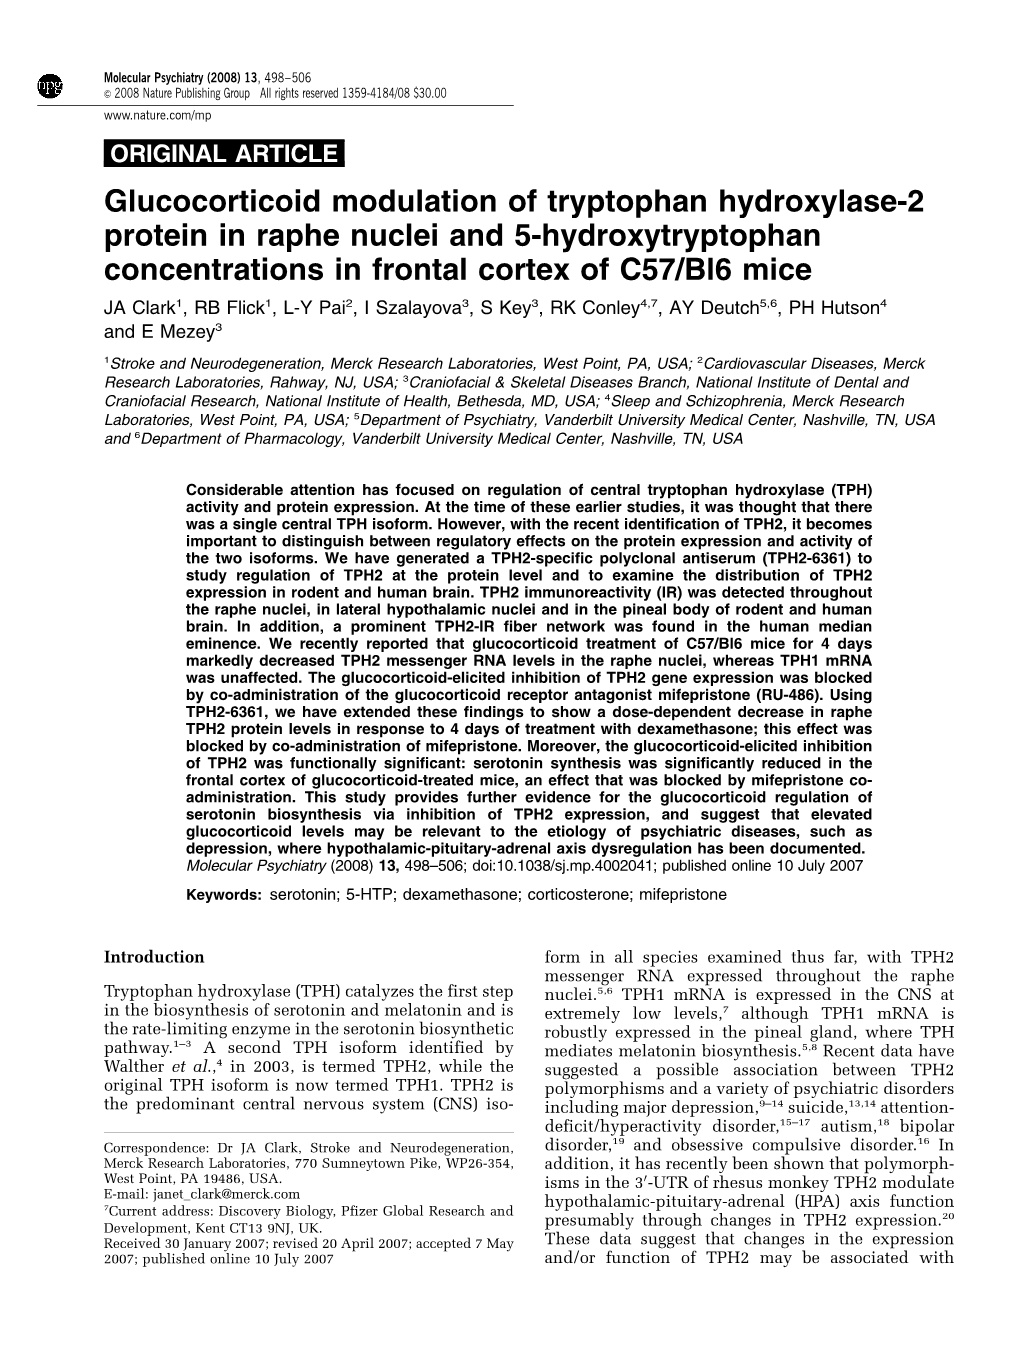 Glucocorticoid Modulation of Tryptophan Hydroxylase-2 Protein In